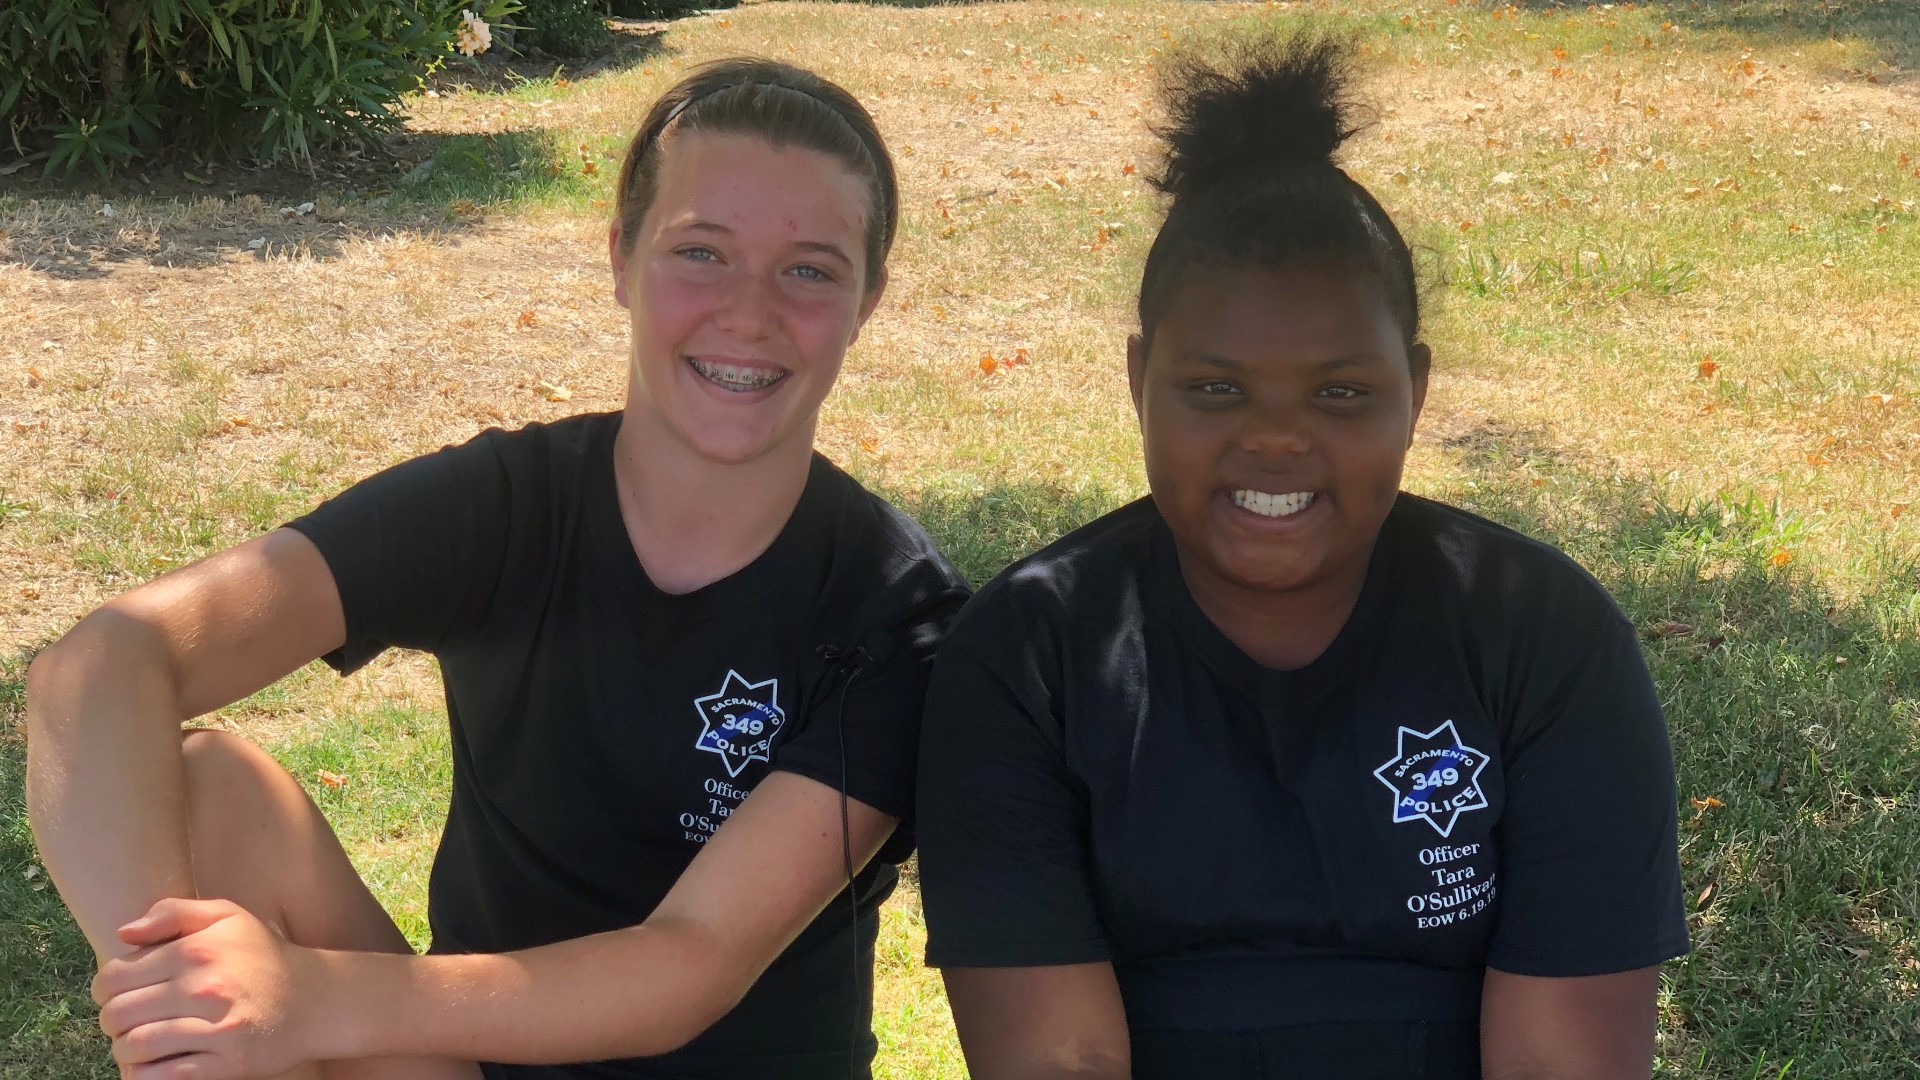 A group of 50 young girls got a chance to participate in the Sacramento Police Department's VIP Academy Experience. The tour was organized by Sac PD's outreach team and six different local organizations.